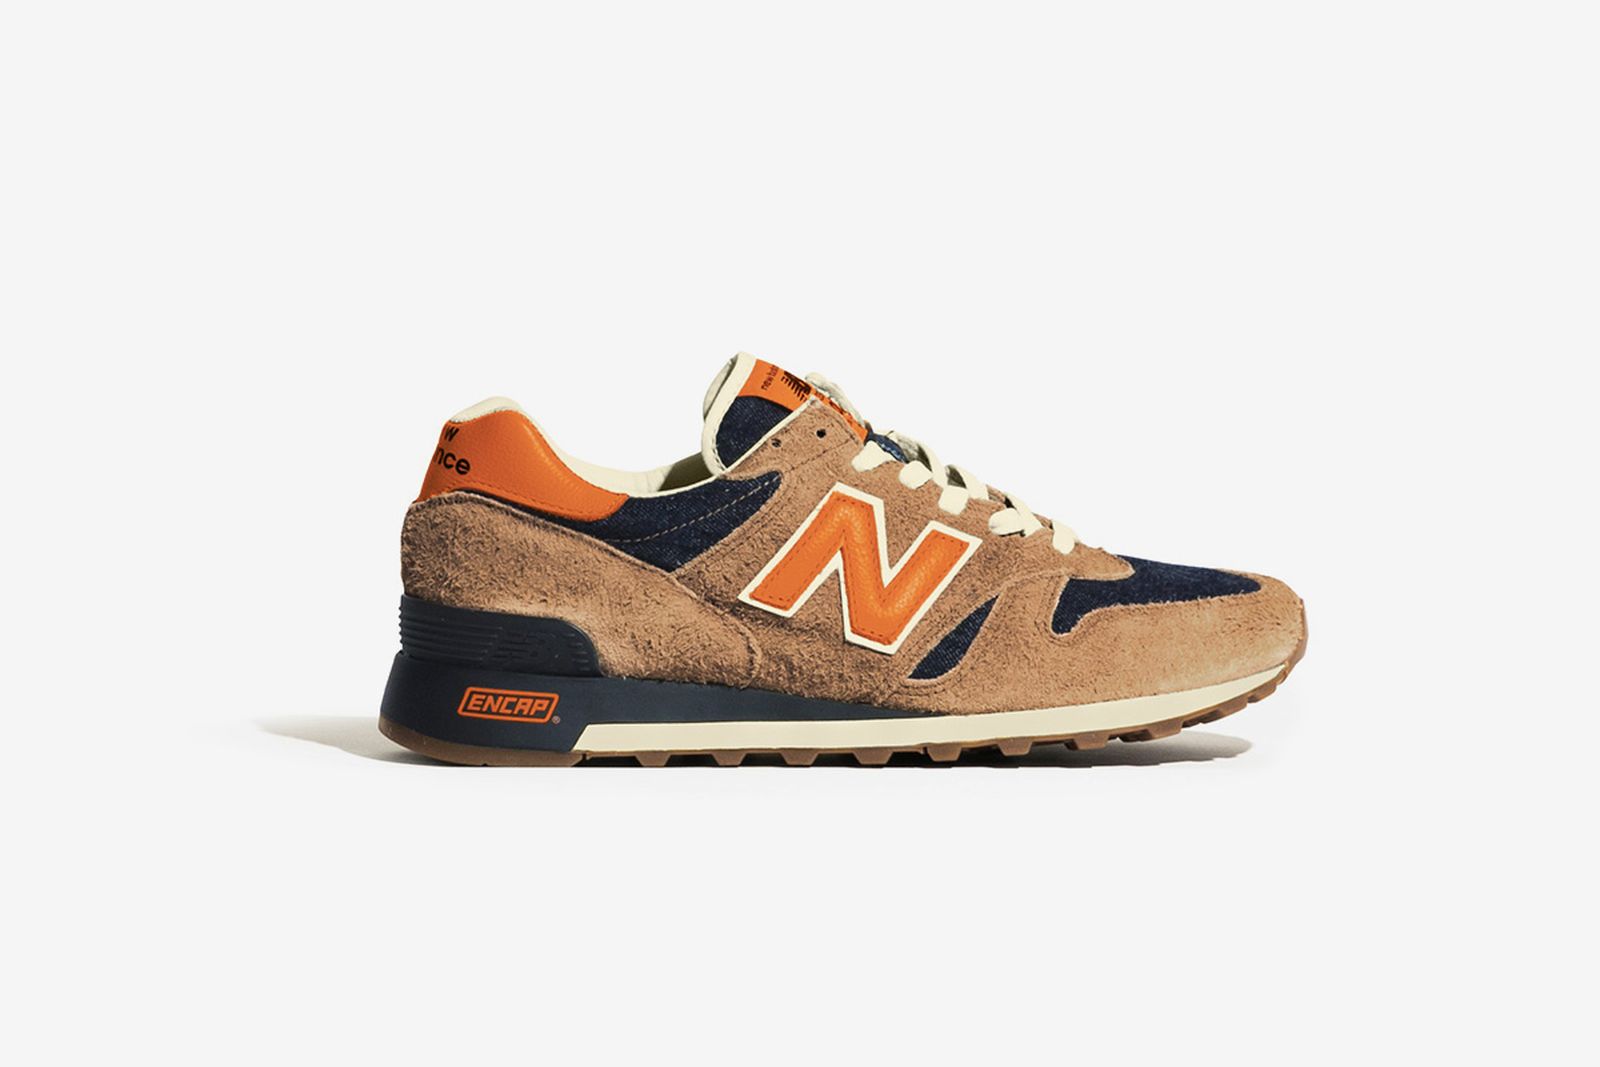 levis-new-balance-1300-release-date-price-10